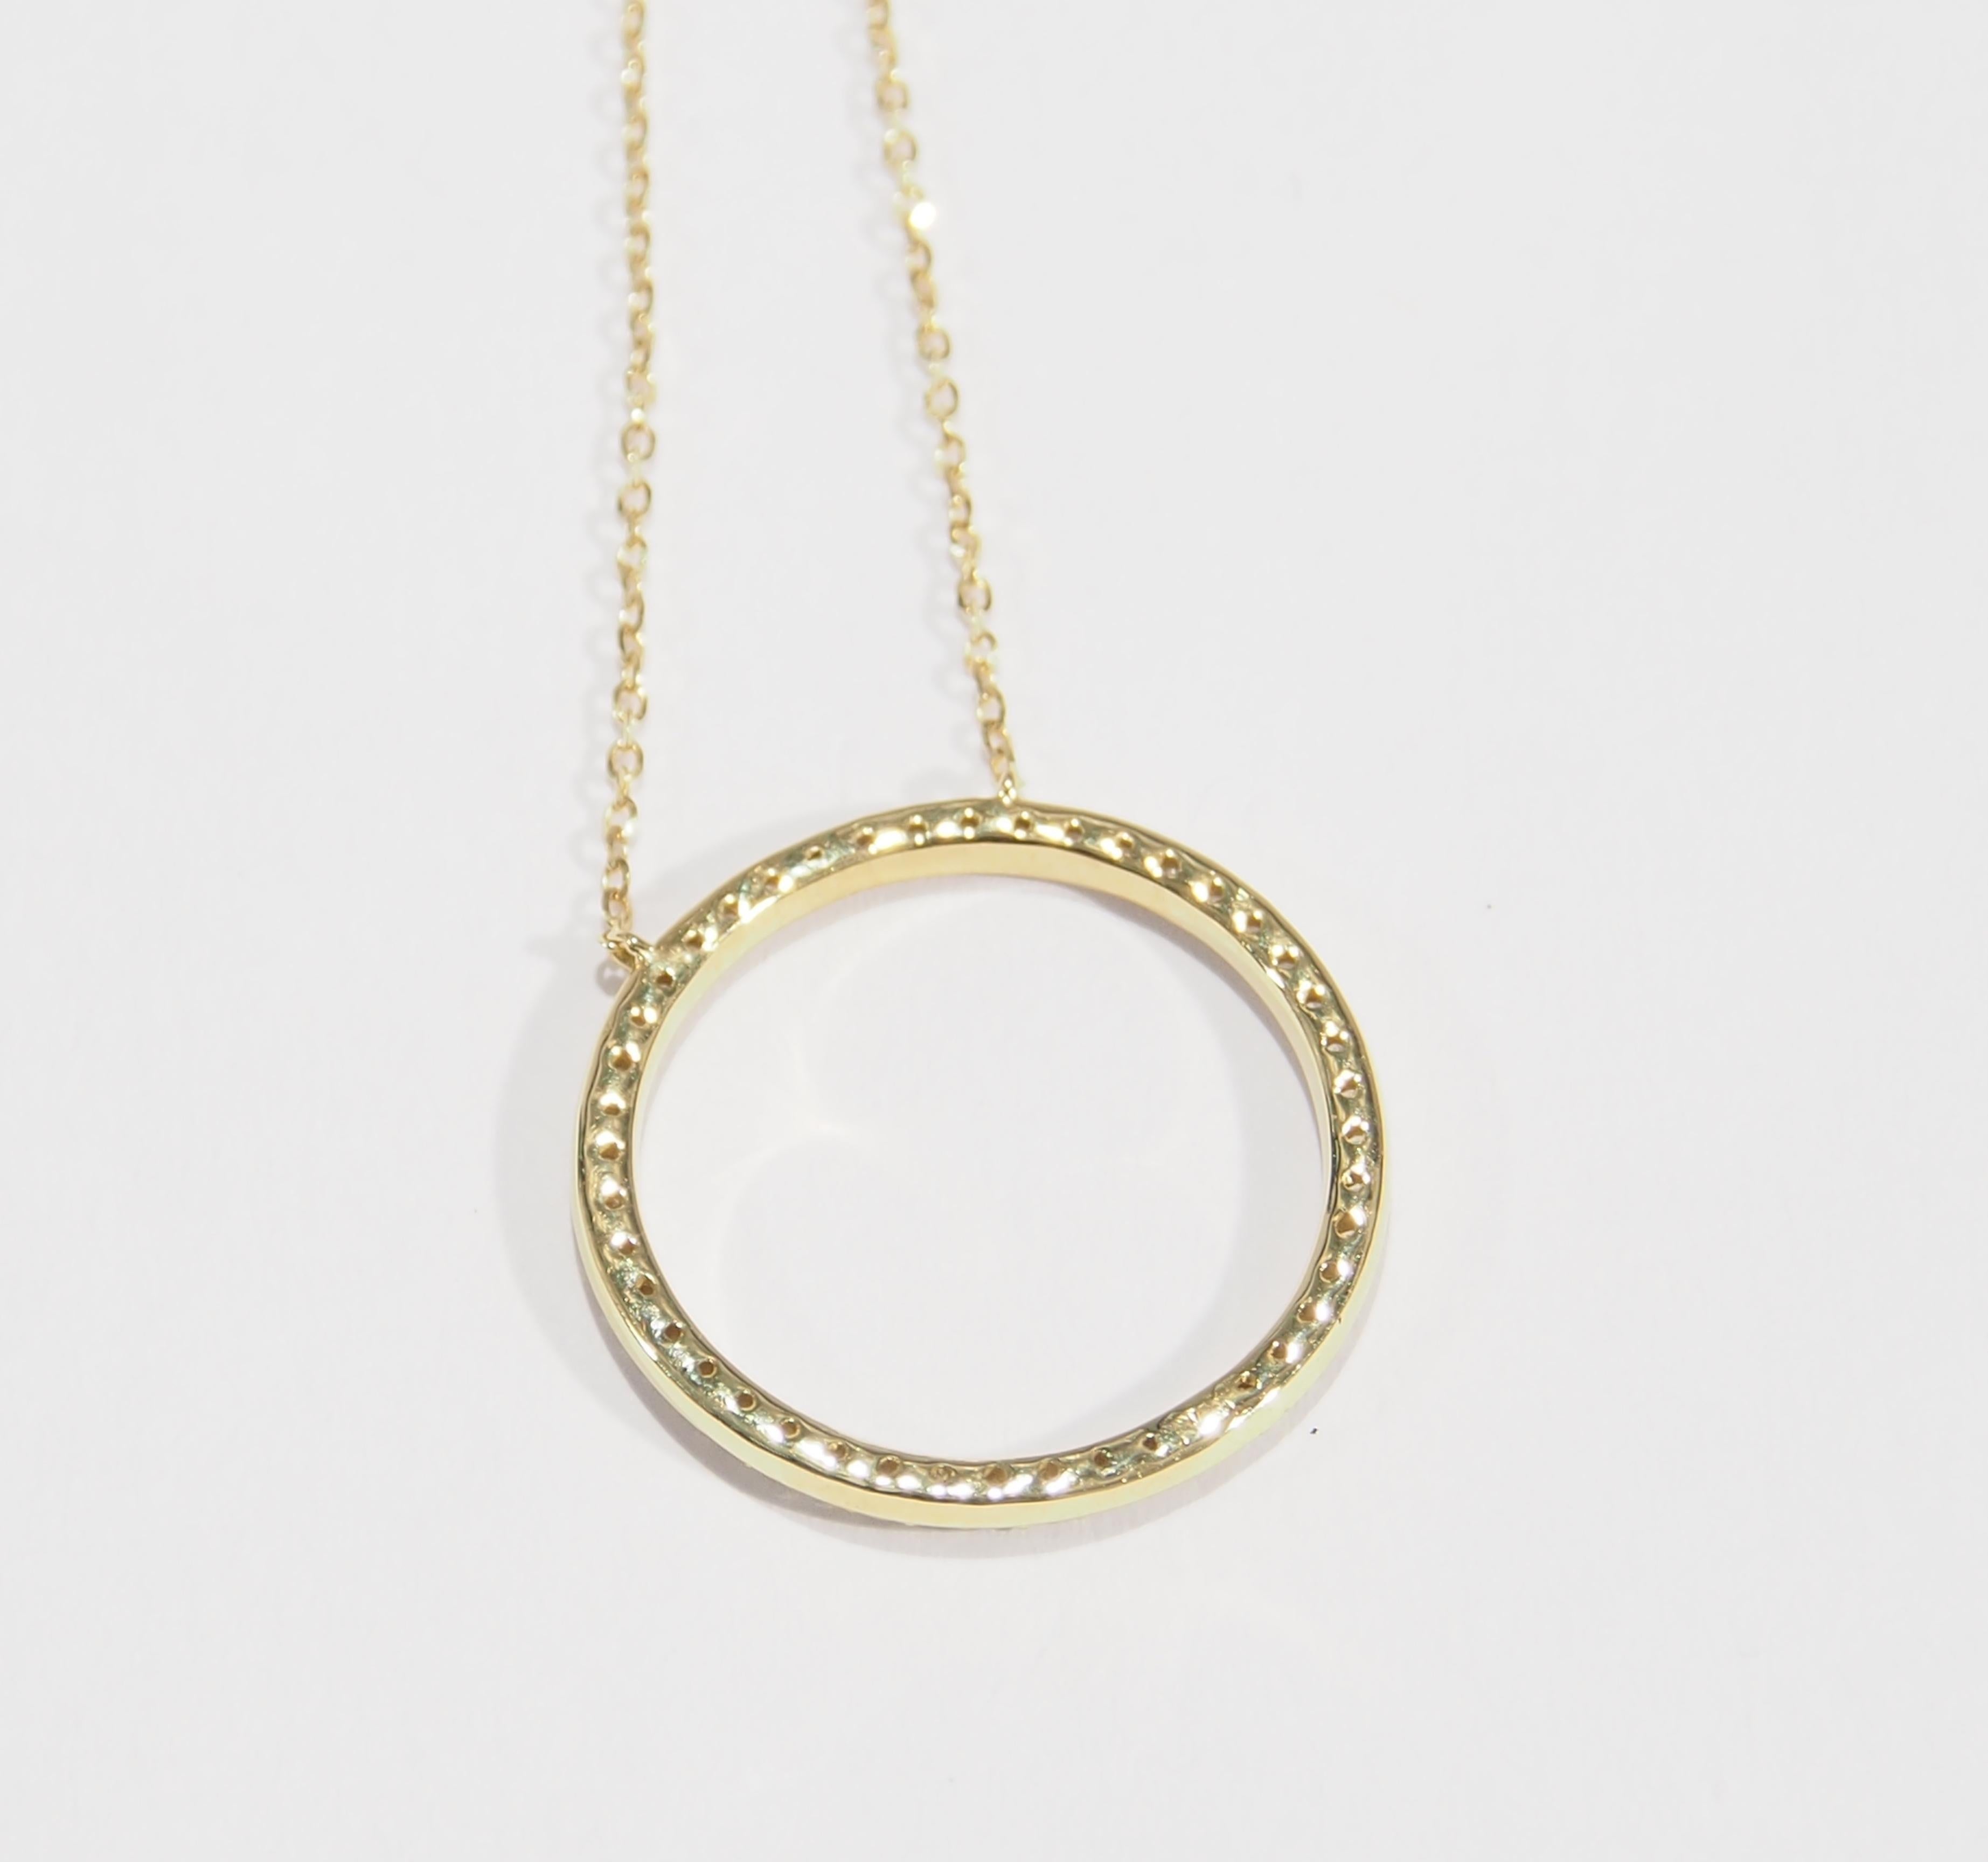 This is a delightful 18K Yellow Gold Necklace featuring a sparkling Diamond Circle. The 3/4 of an Inch Diameter Circle contains approximately 0.43ctw of Round Brilliant Cut Diamonds, G-H in Color, VS-SI in Clarity and is suspended from an adjustable